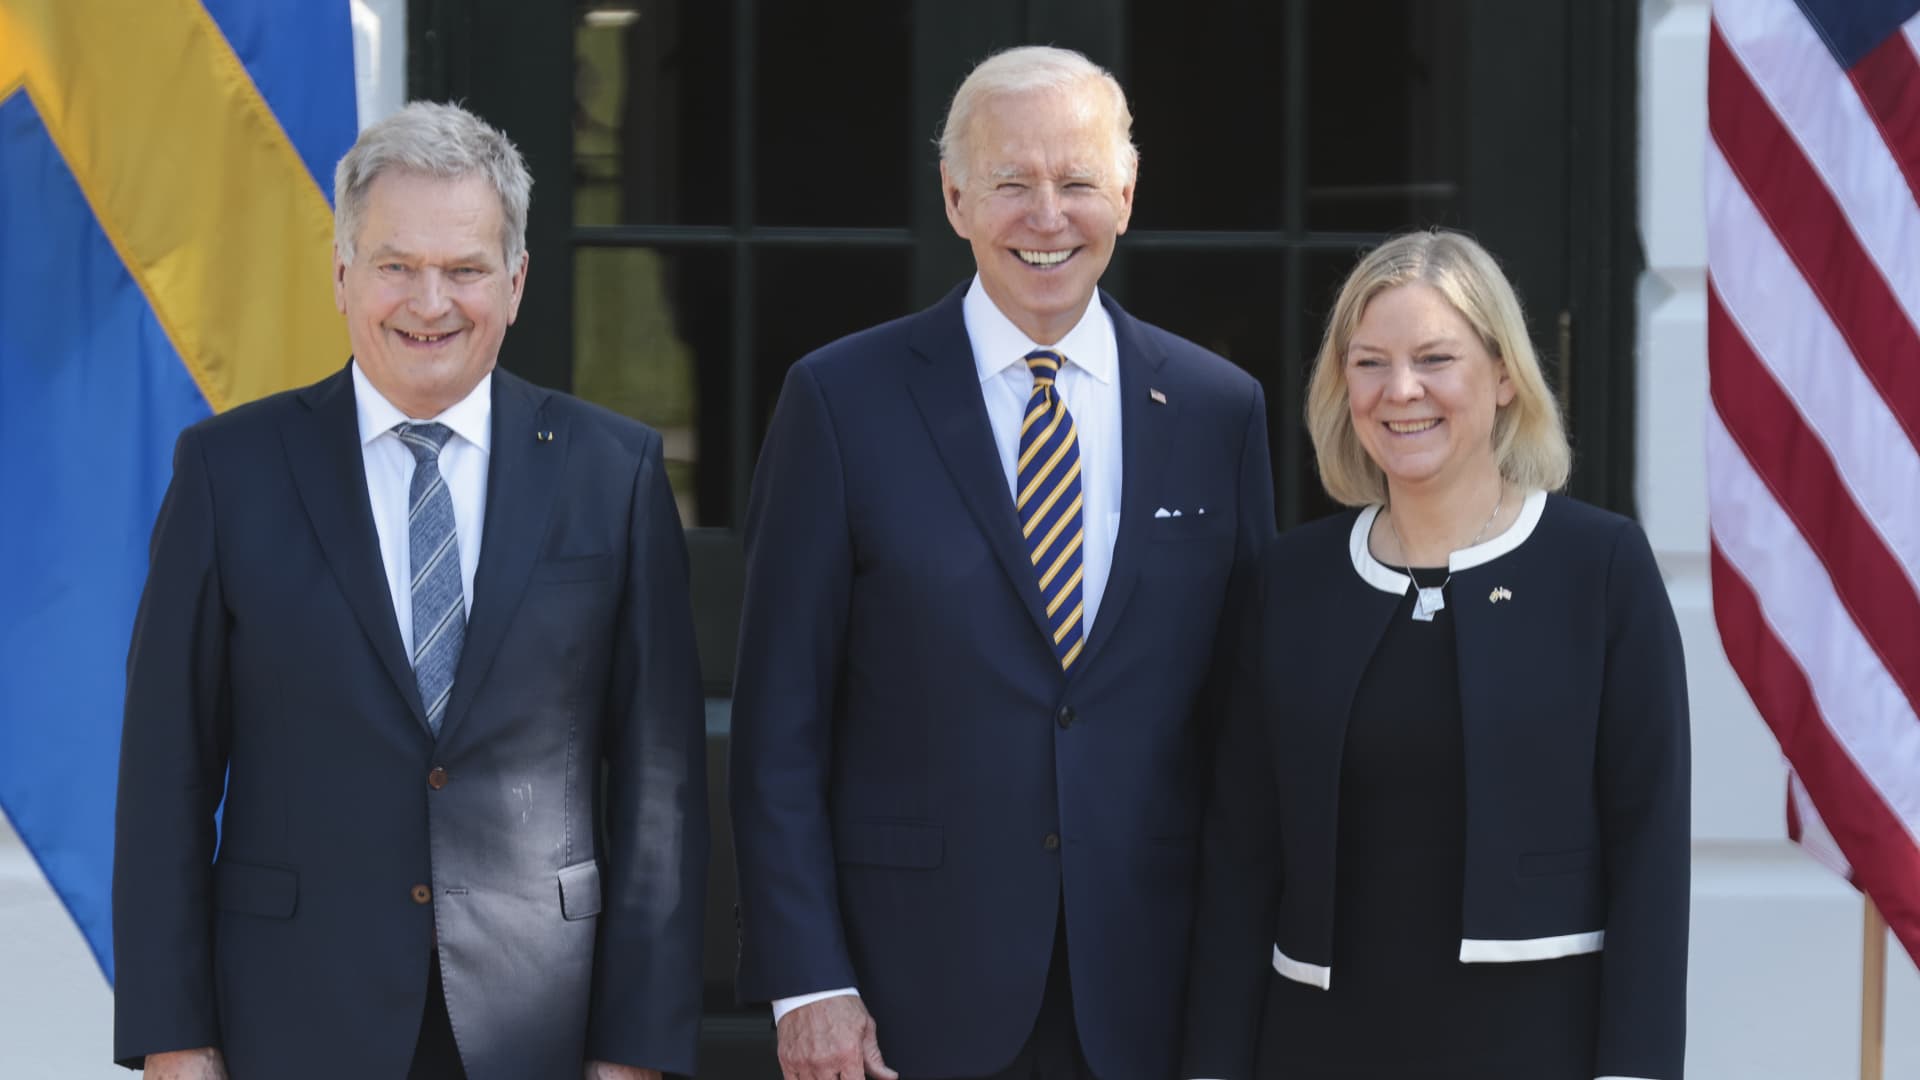 US President Joe Biden, center, welcomes Sauli Niinisto, Finland's president, left, and Magdalena Andersson, Sweden's prime minister, on the South Lawn of the White House in Washington, D.C., US, on Thursday, May 19, 2022.